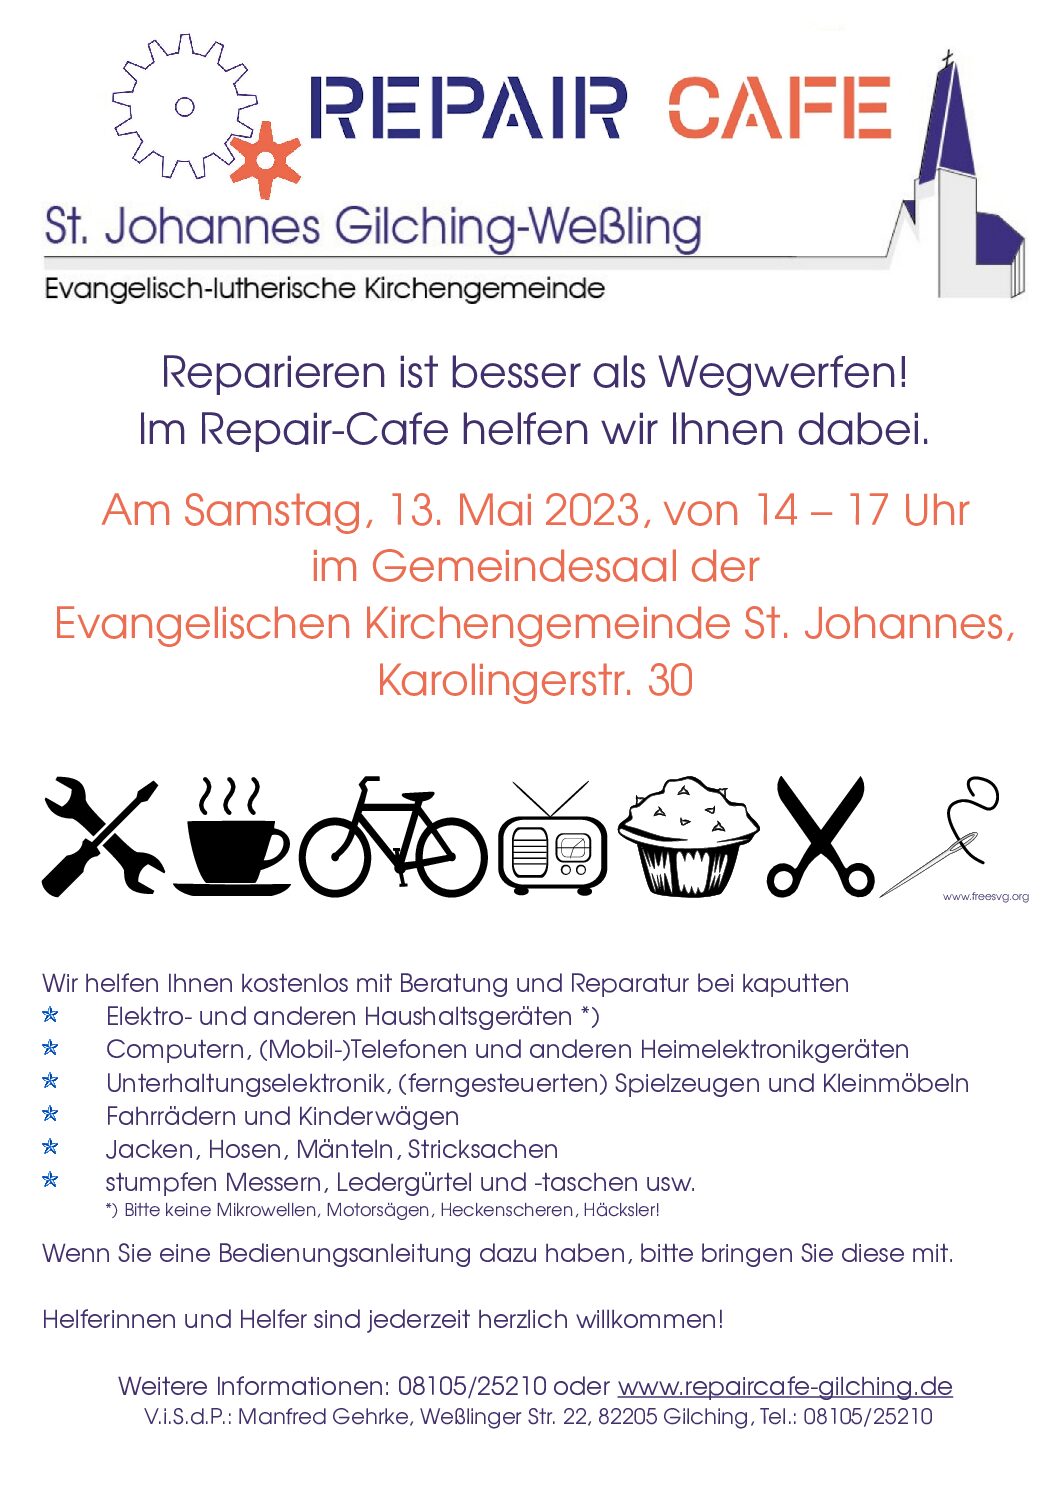 Repaircafé in Gilching (13.5.2023, 14 bis 17 Uhr)